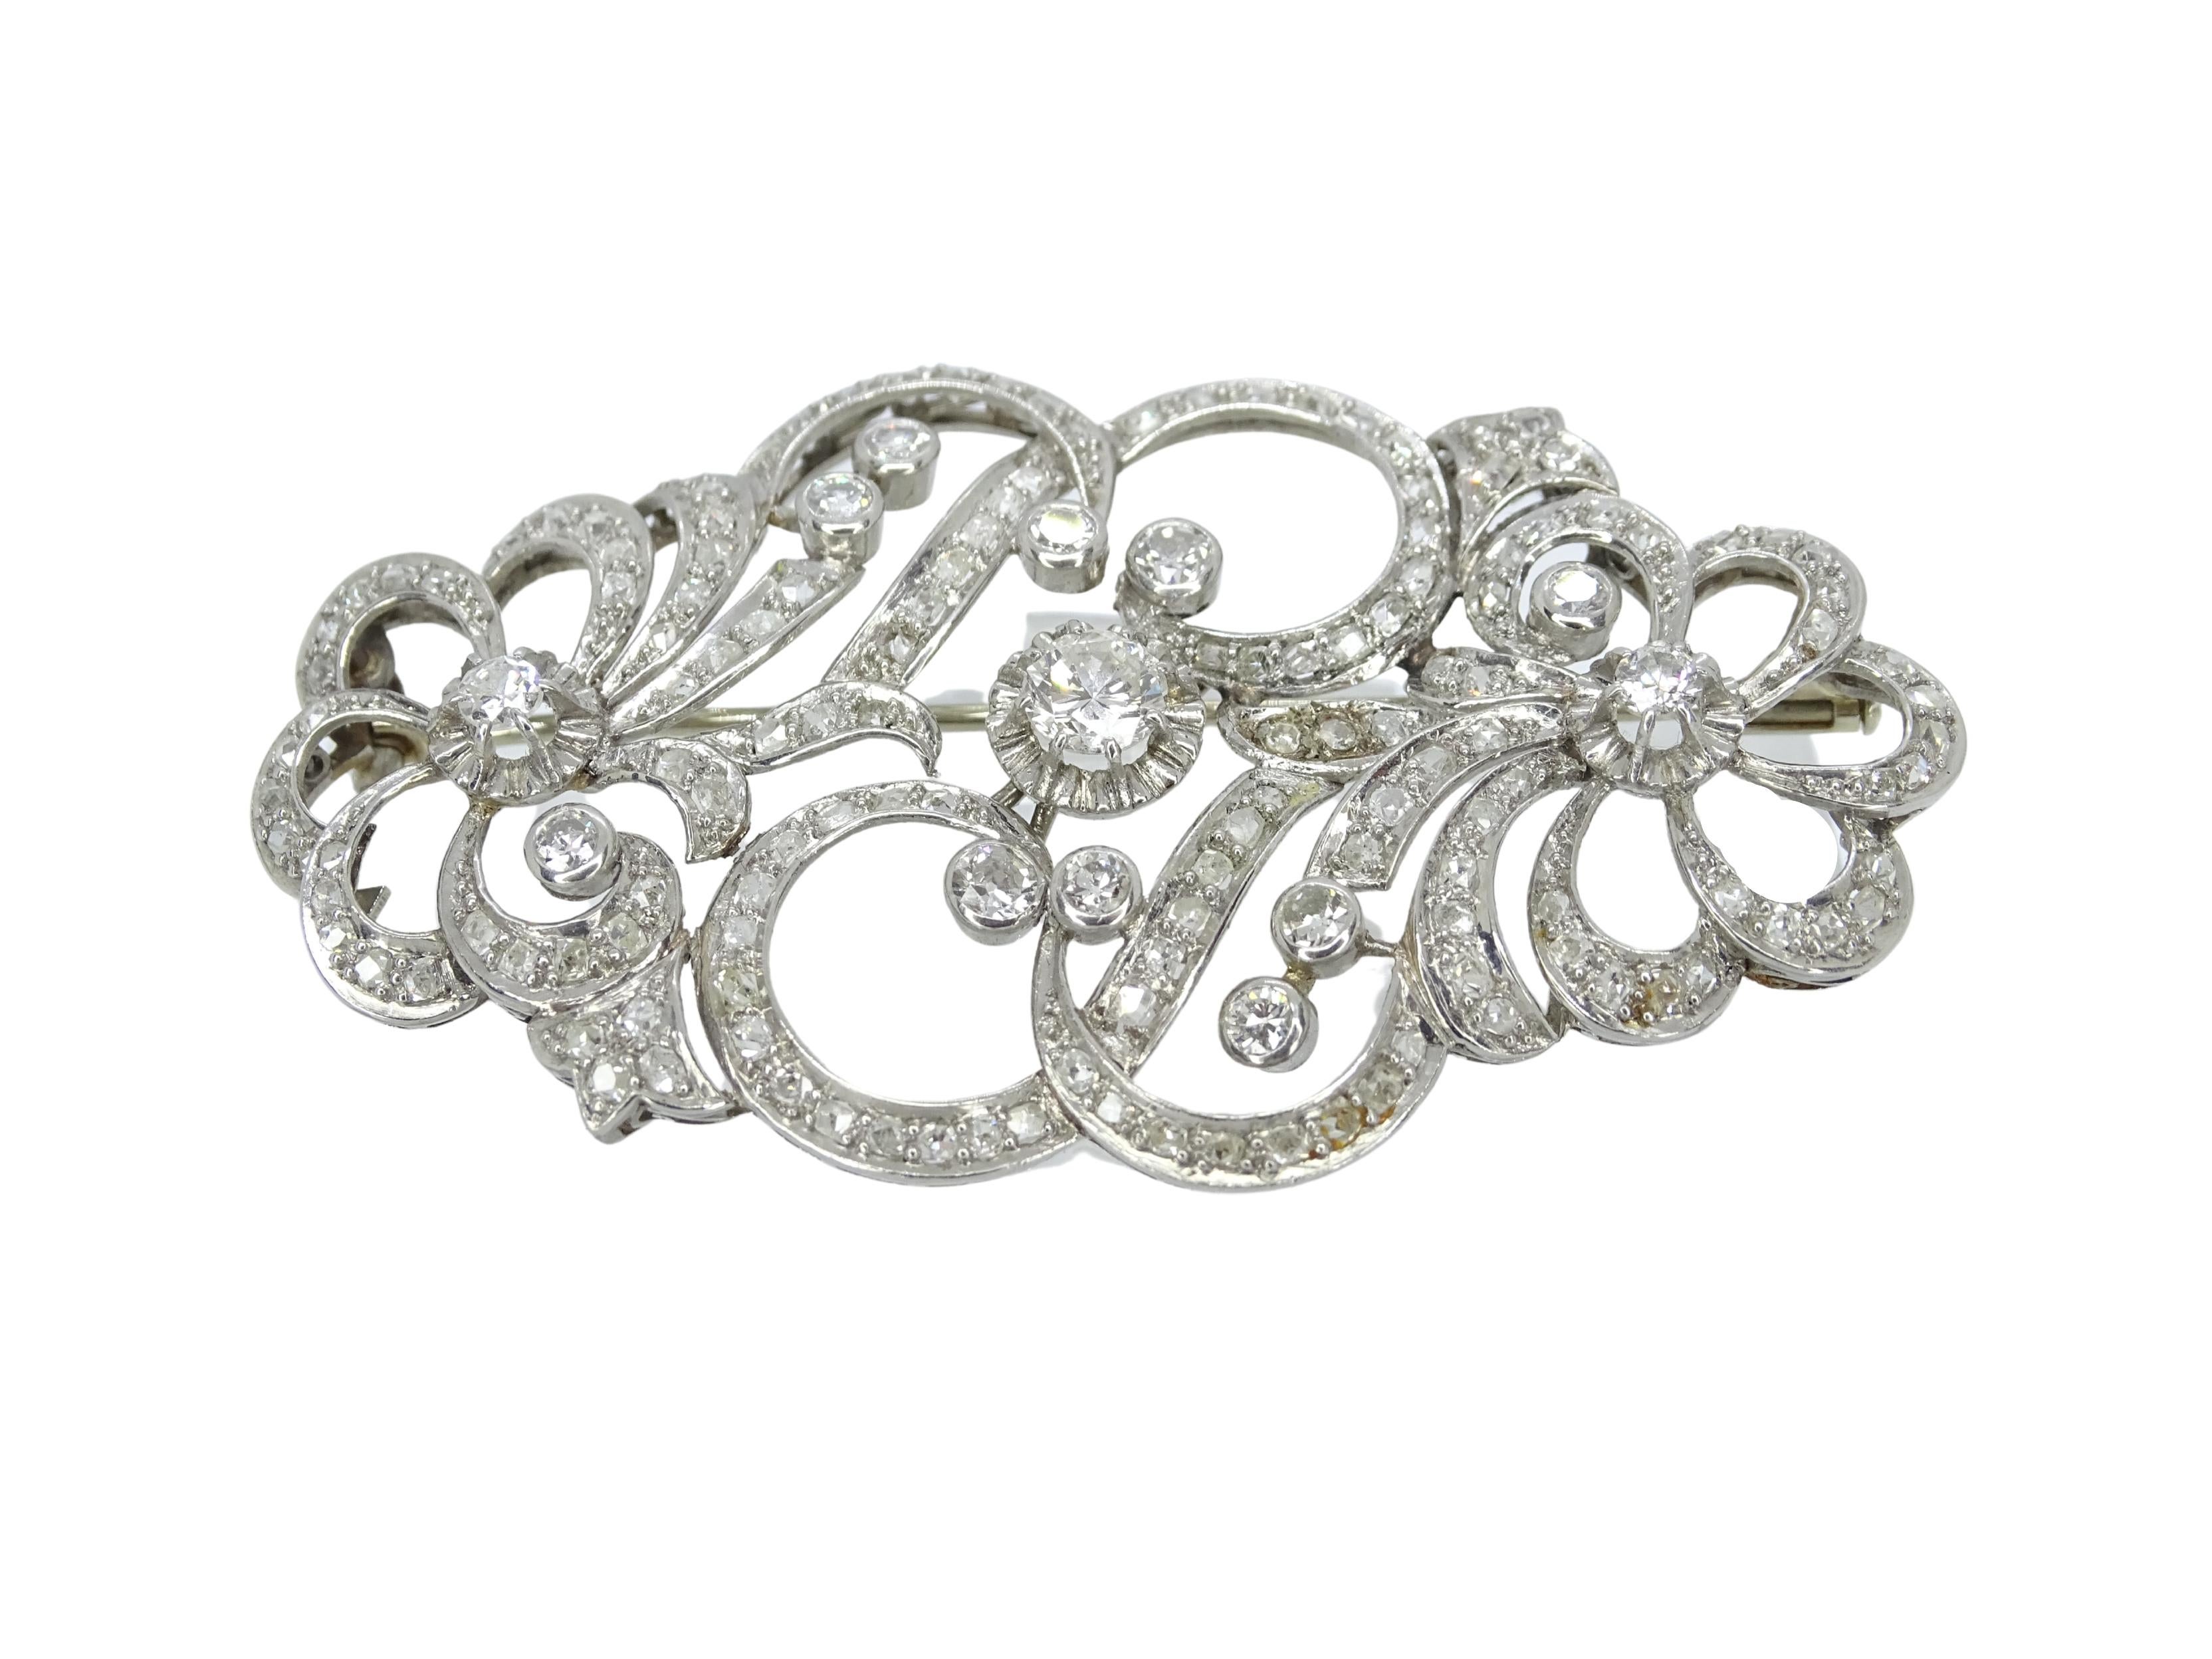 White gold and diamonds Art Nouveau Brooch , French jewell 13